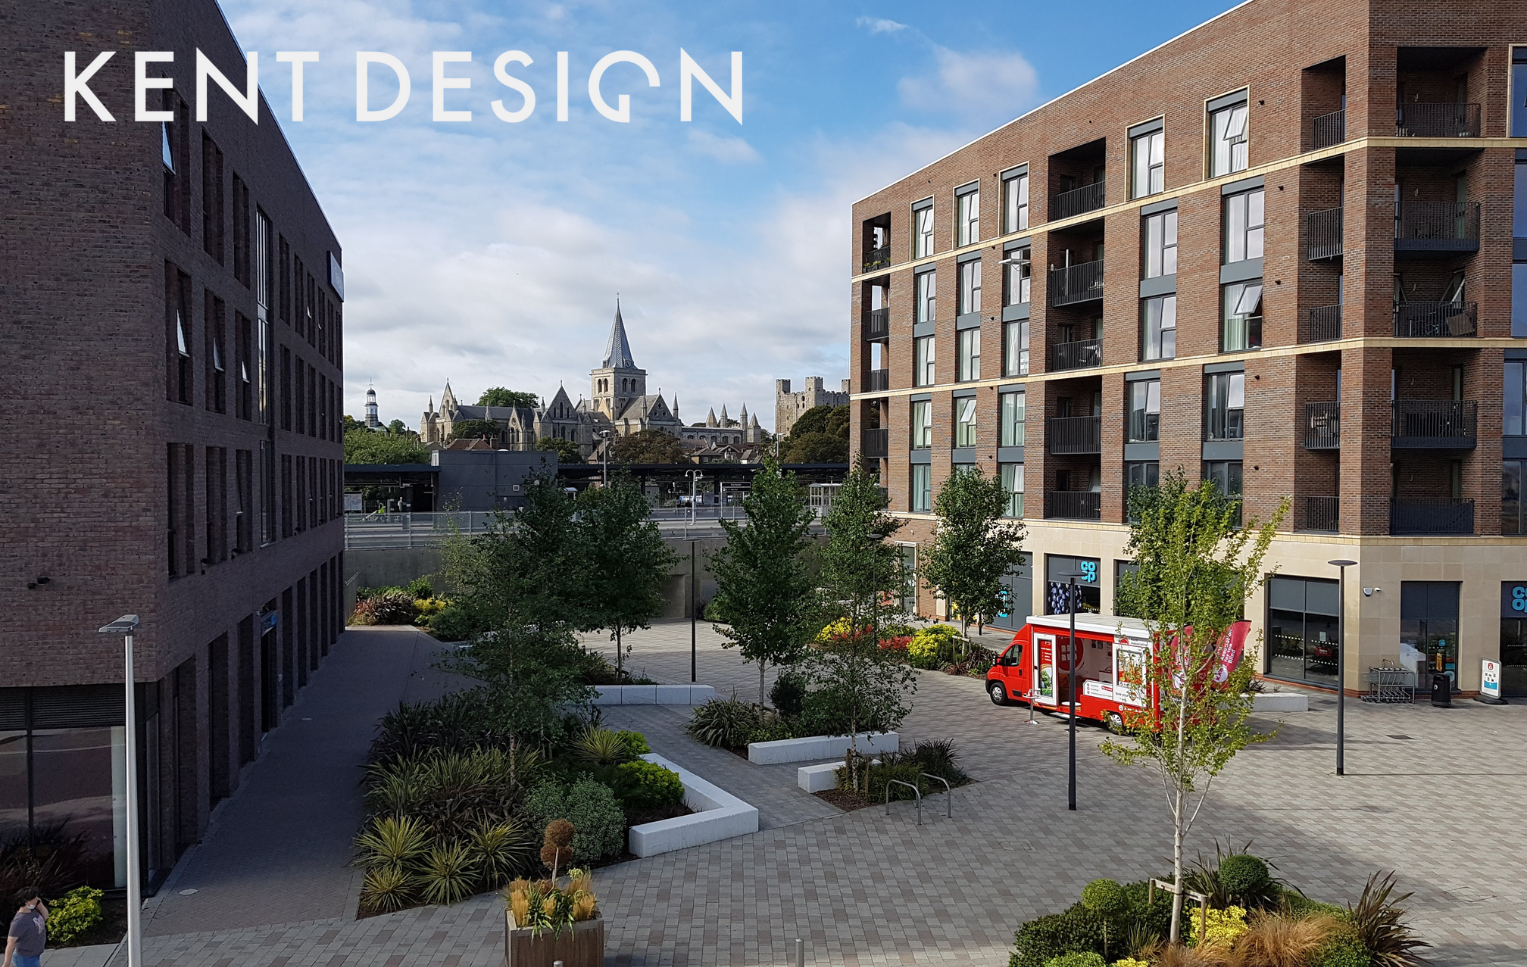 Design South East — Kent Design – Briefing: Policy – An overview of the revised NPPF and implications for design quality management